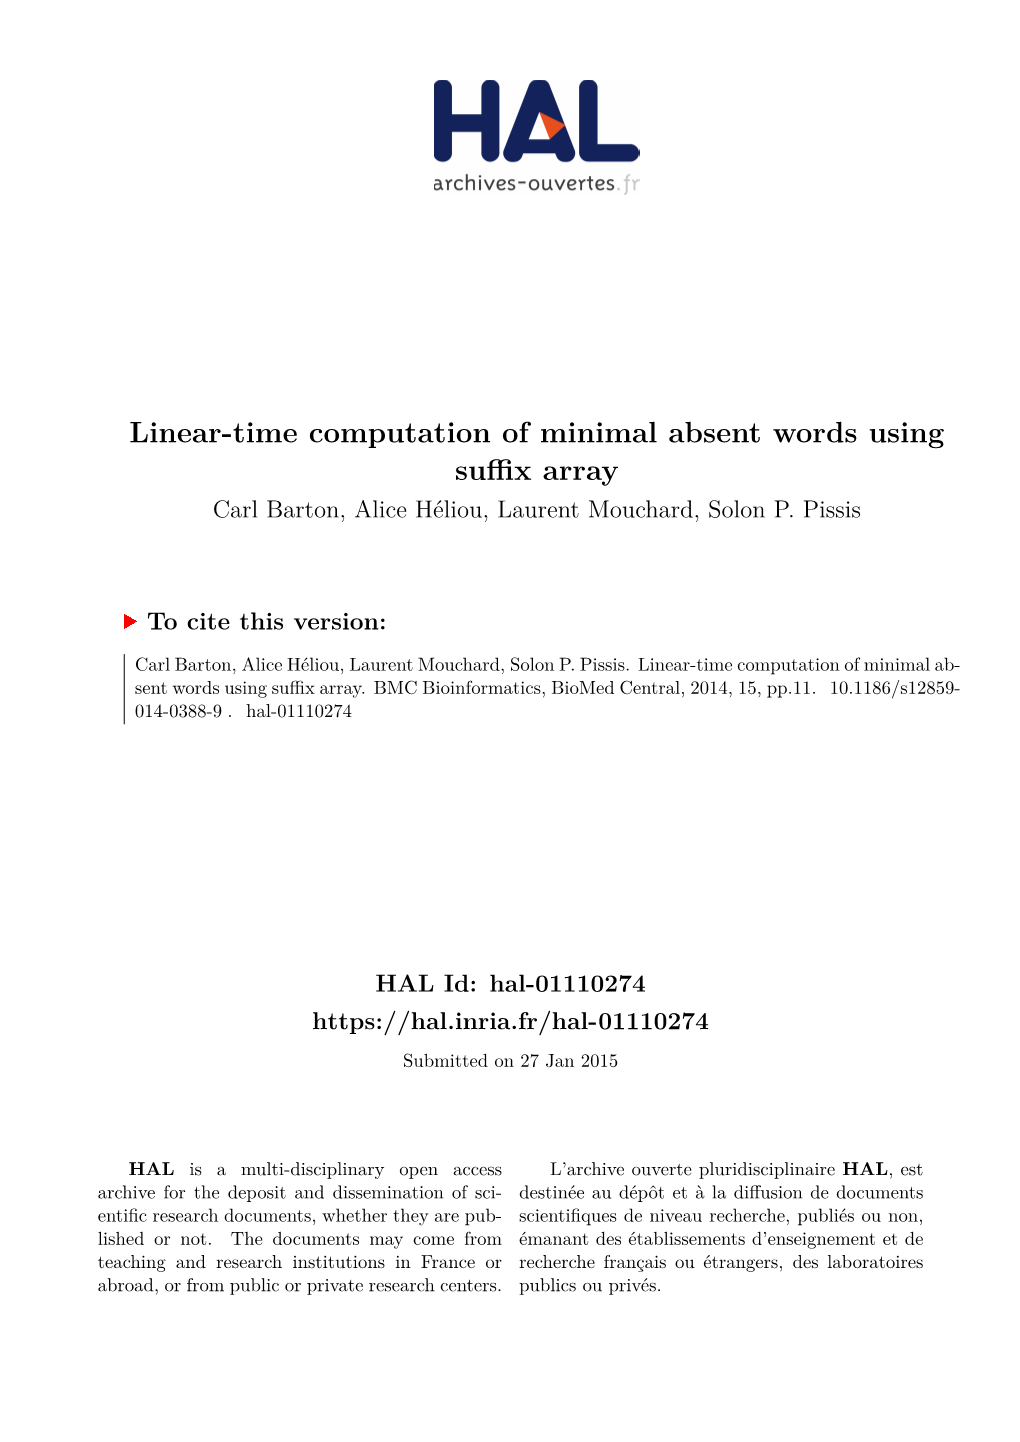 Linear-Time Computation of Minimal Absent Words Using Suffix Array Carl Barton1, Alice Heliou2,3, Laurent Mouchard4 and Solon P Pissis1*